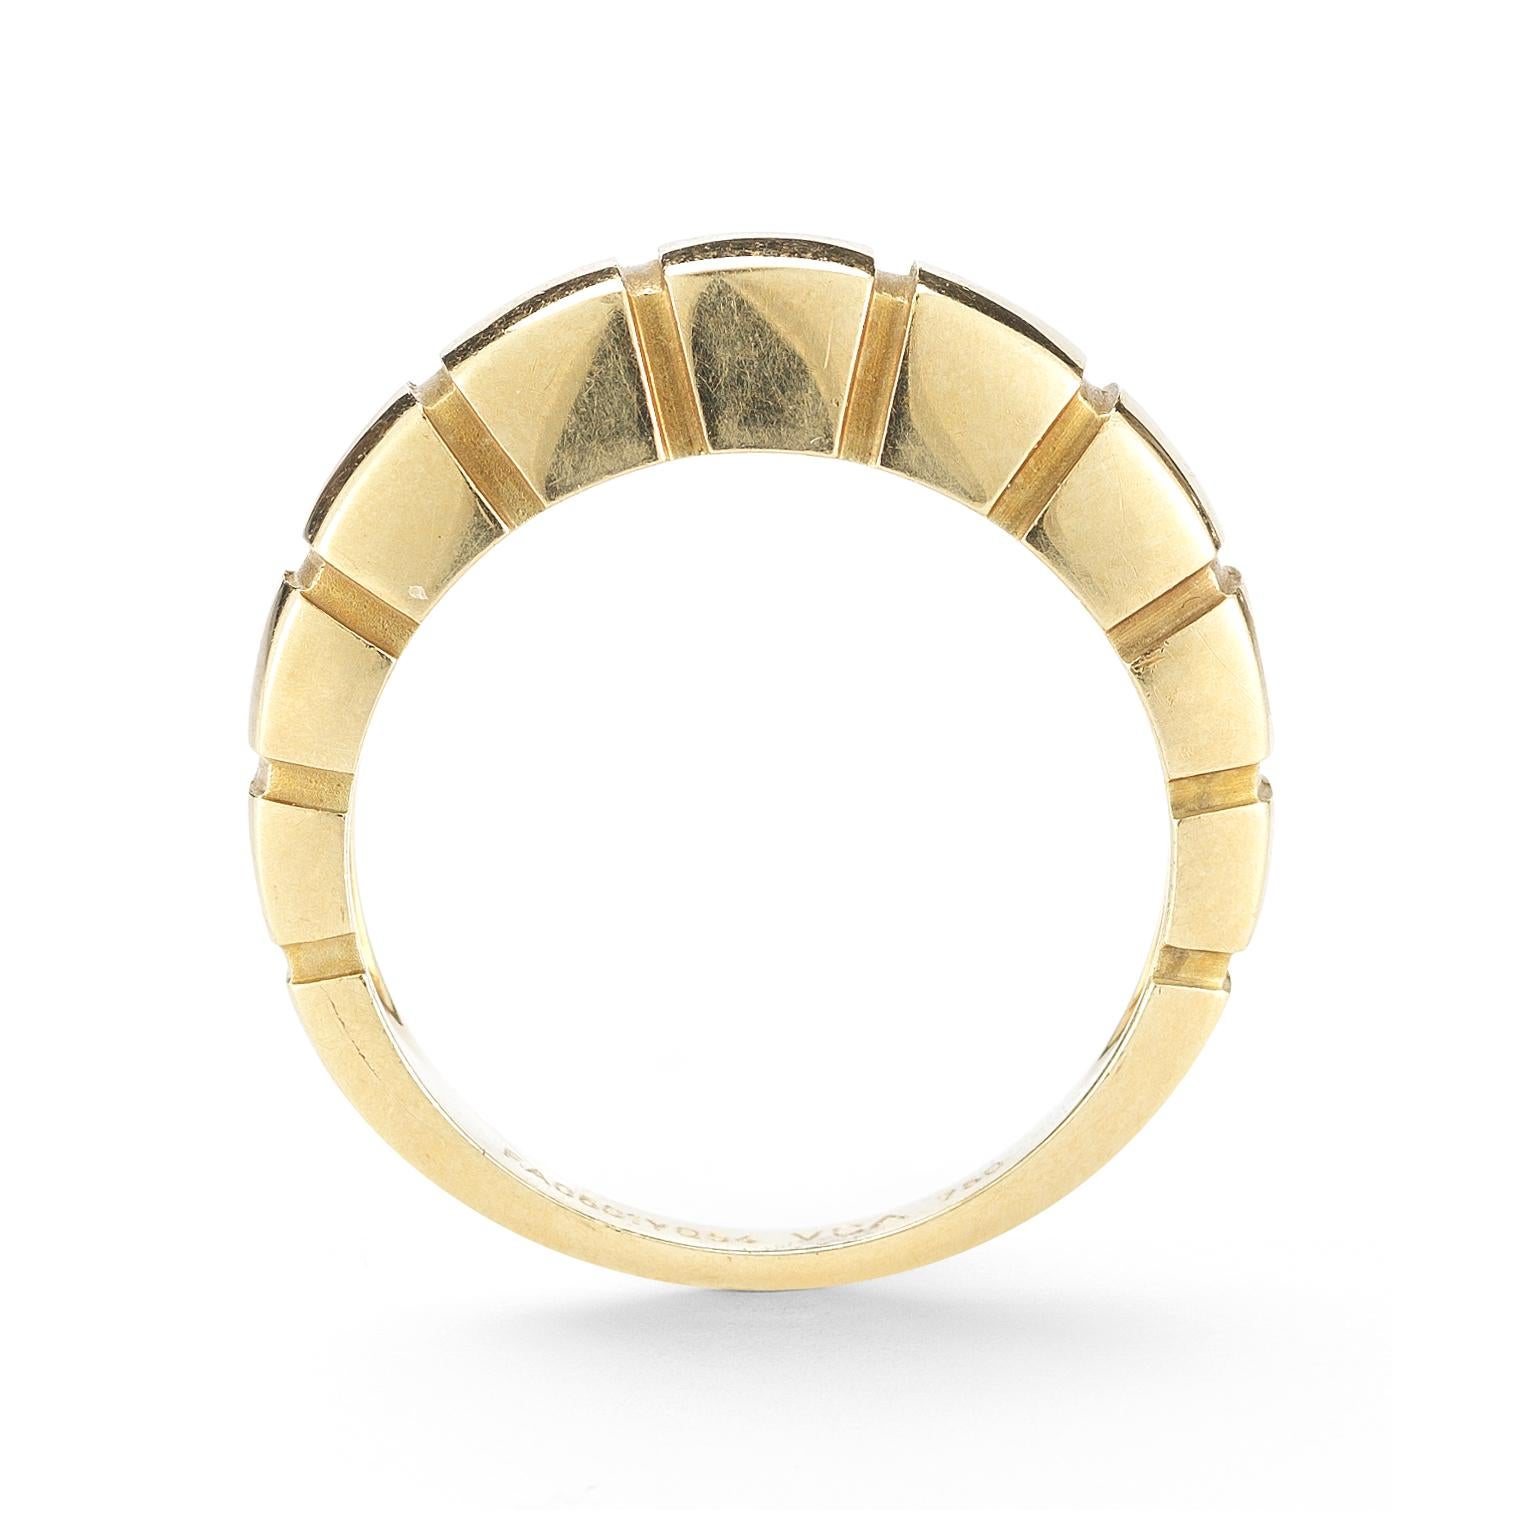 Stack or wear alone! This 18 karat yellow gold Van Cleef & Arpels band style ring is banded in curved cubic sections, signed and numbered VCA FA0501YG54, width 5.5mm. Ring size 7-1/4.  